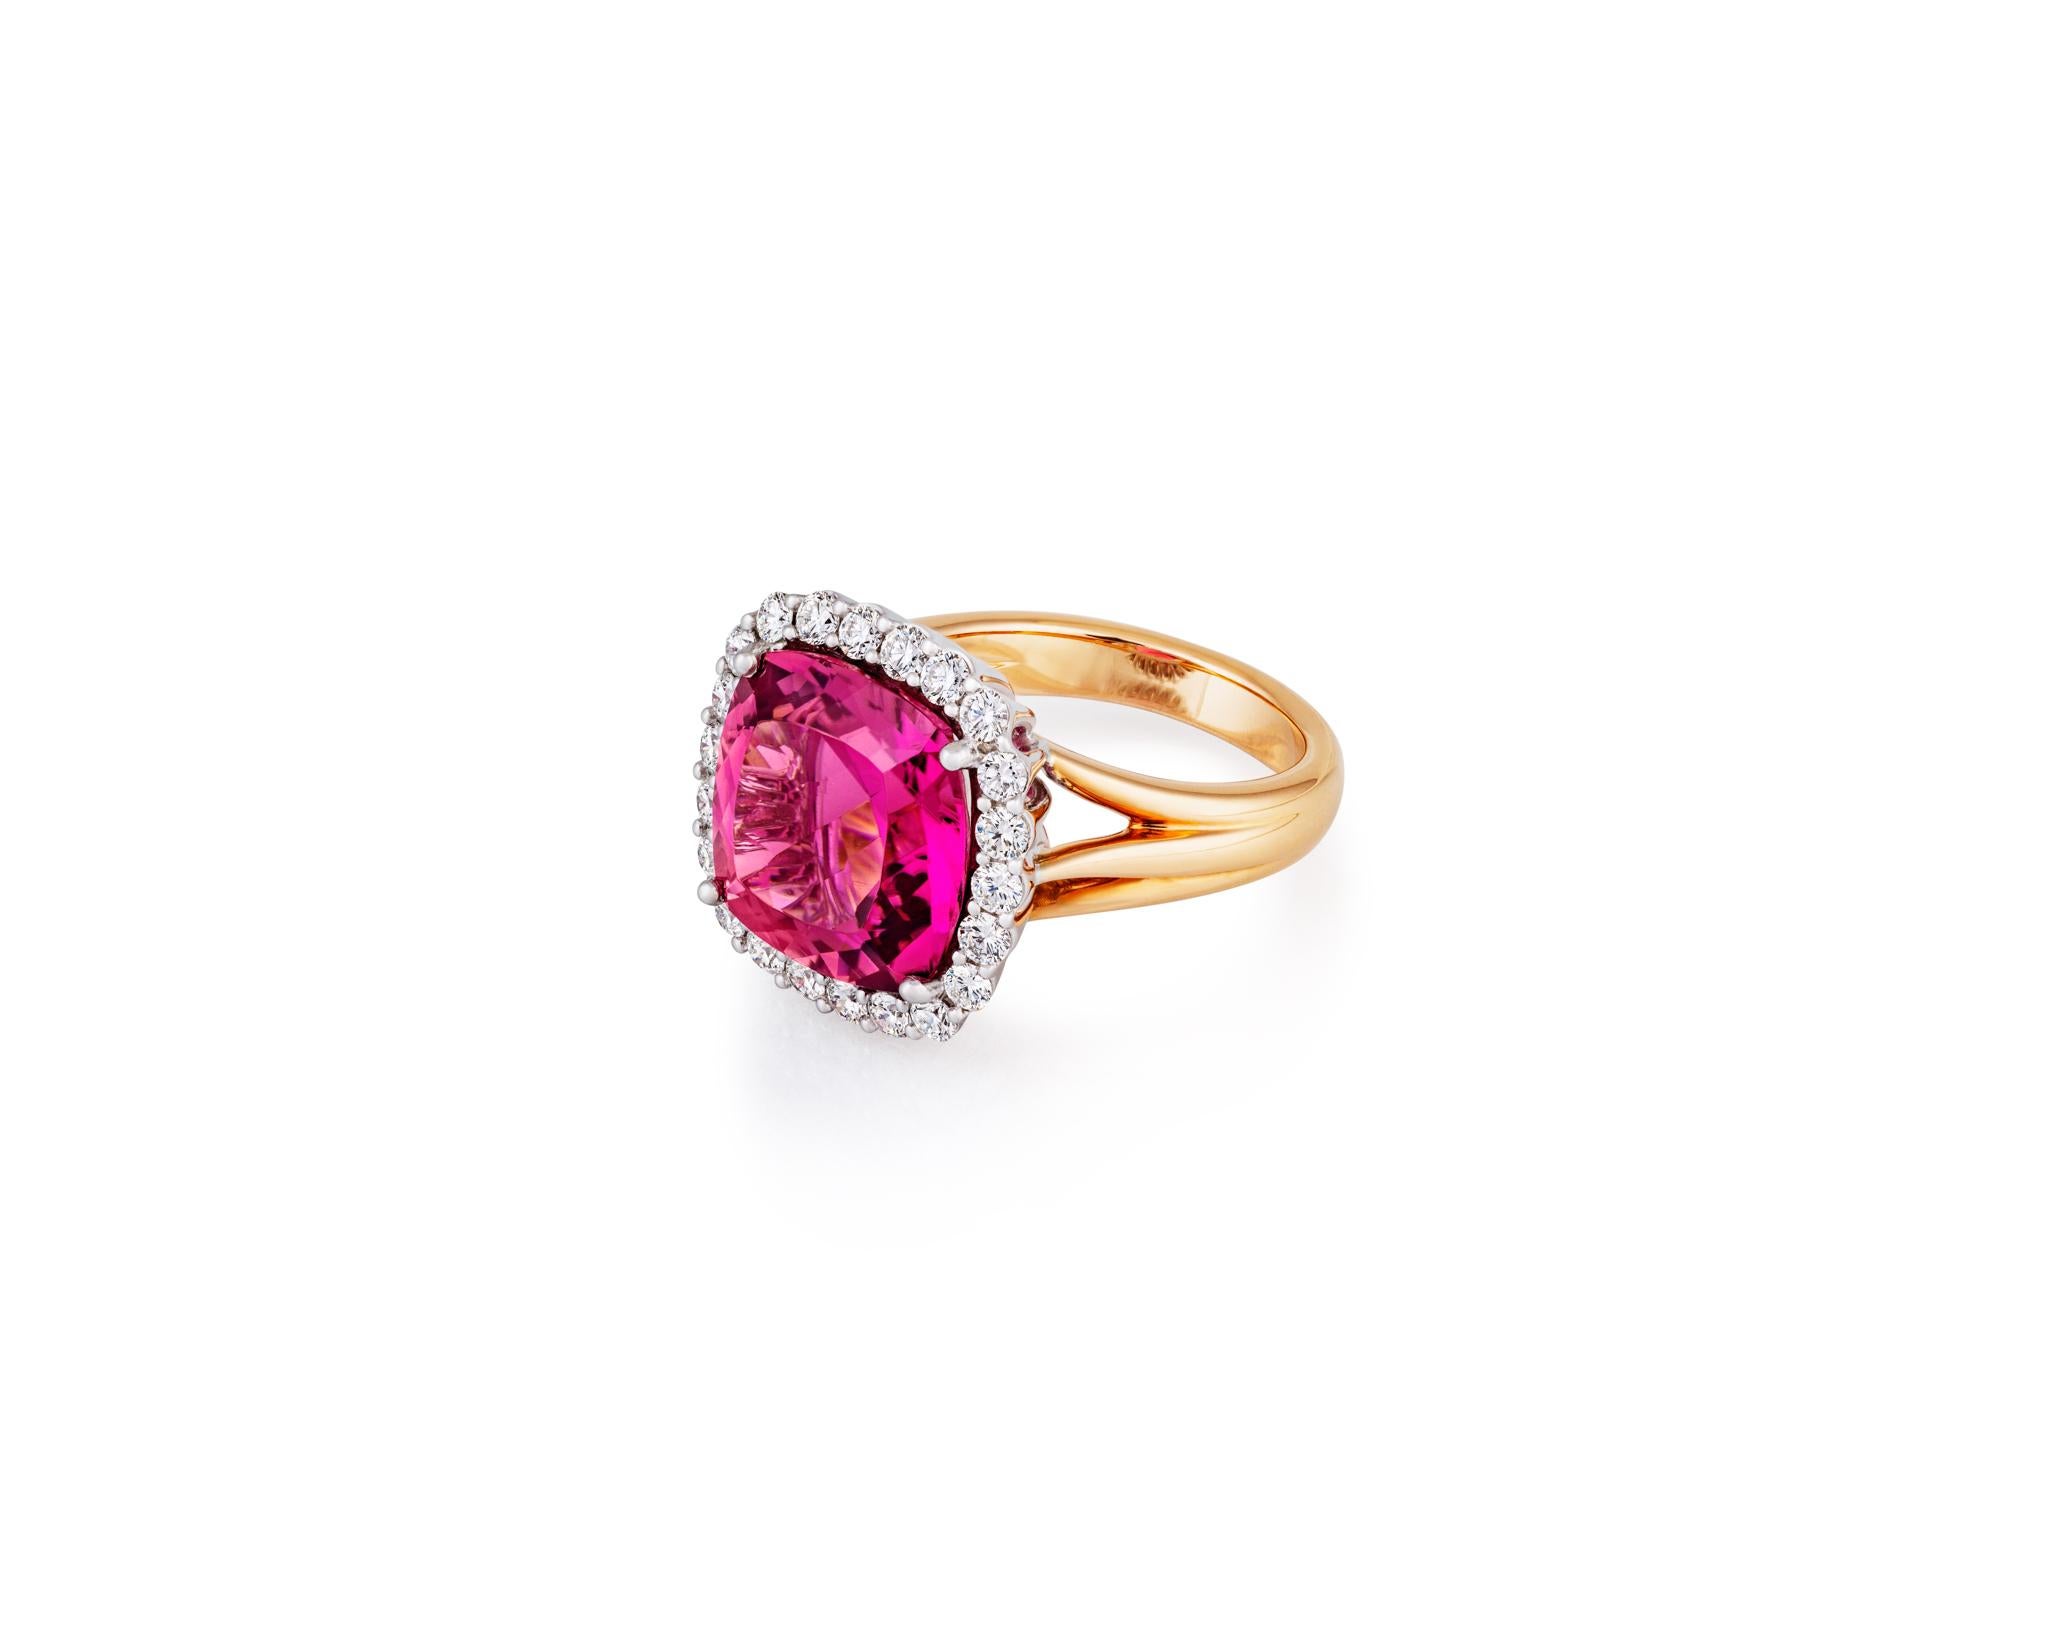 Beautiful 8.3ct Cushion Cut Pink Tourmaline surrounded by .84ct Diamonds on 14kt Yellow Gold. With the highest quality materials and vintage-inspired design, this ring will make you feel like you're a royal in the Renaissance Age. Only one